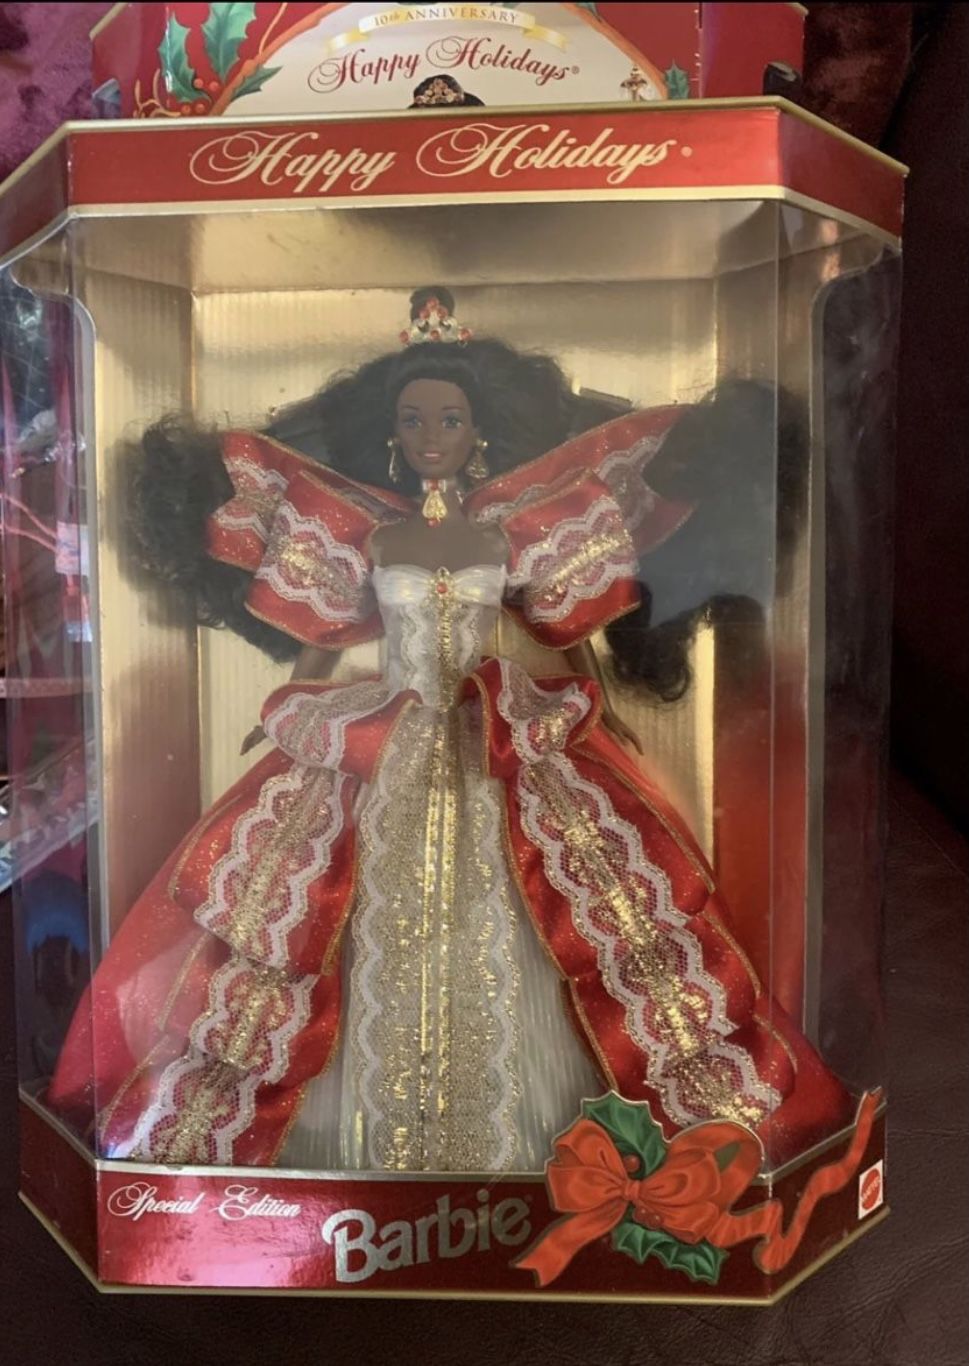 New Special Edition Holiday Barbie